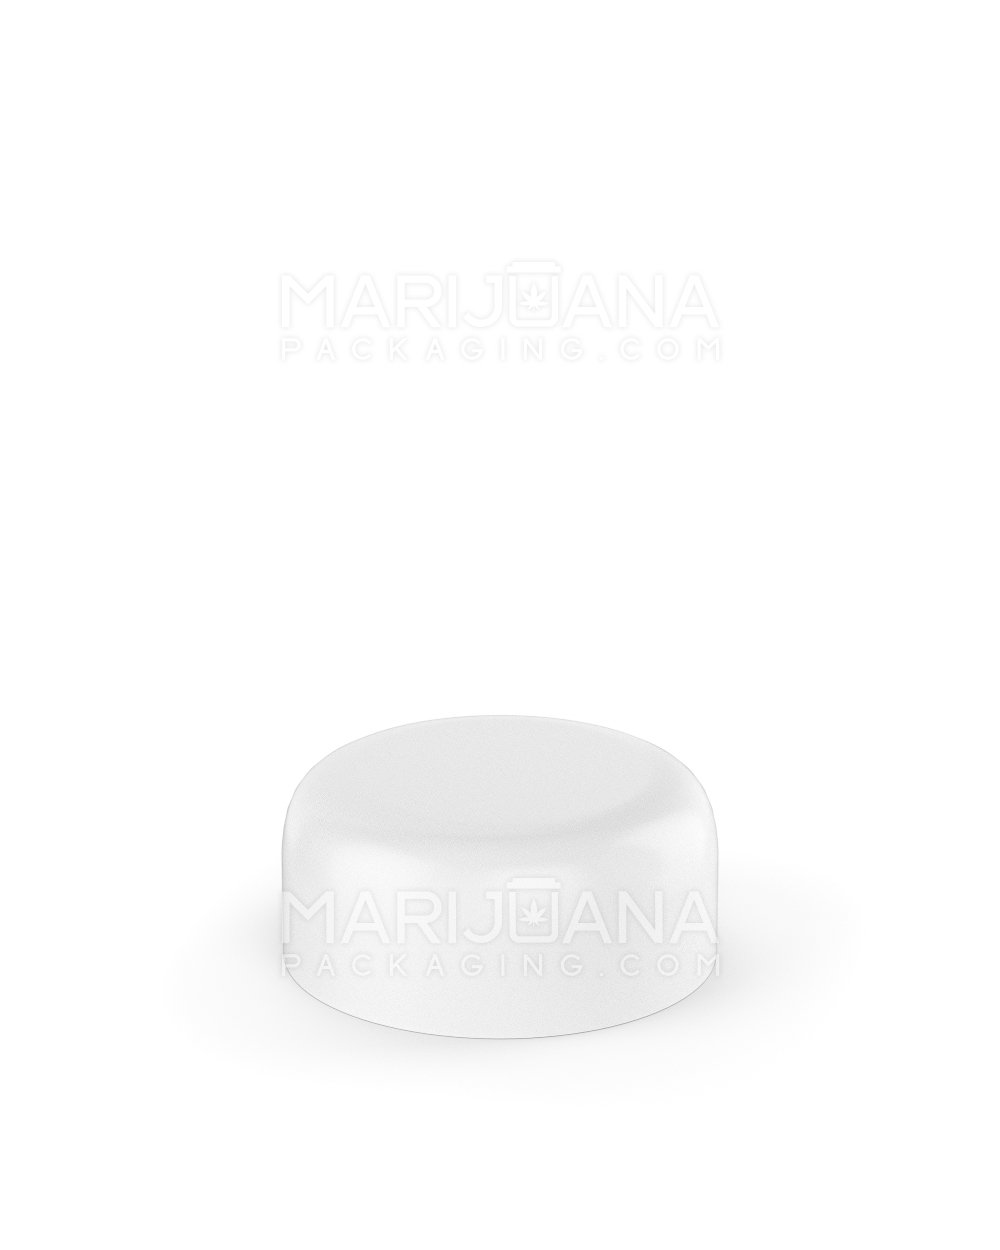 Child Resistant | Smooth Push Down & Turn Plastic Caps w/ Foam Liner | 29mm - Semi Gloss White - 504 Count - 3